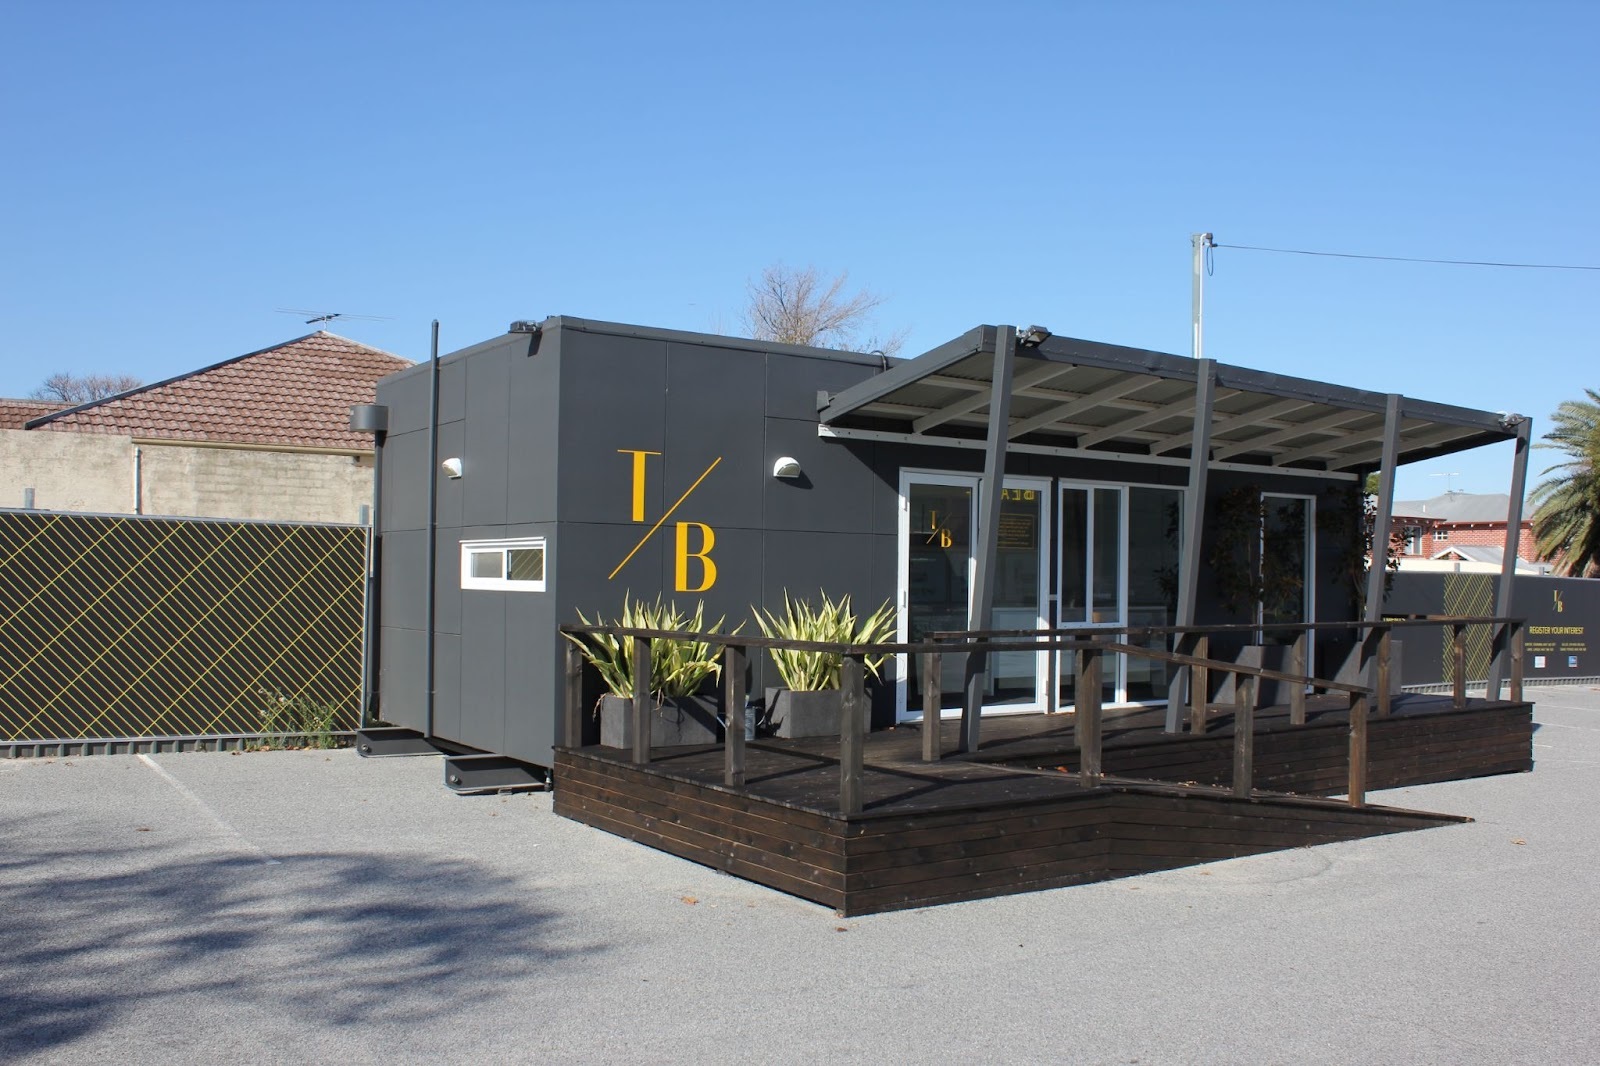 Modular office building with dark facade and gold lettering, featuring an outdoor deck and potted plants